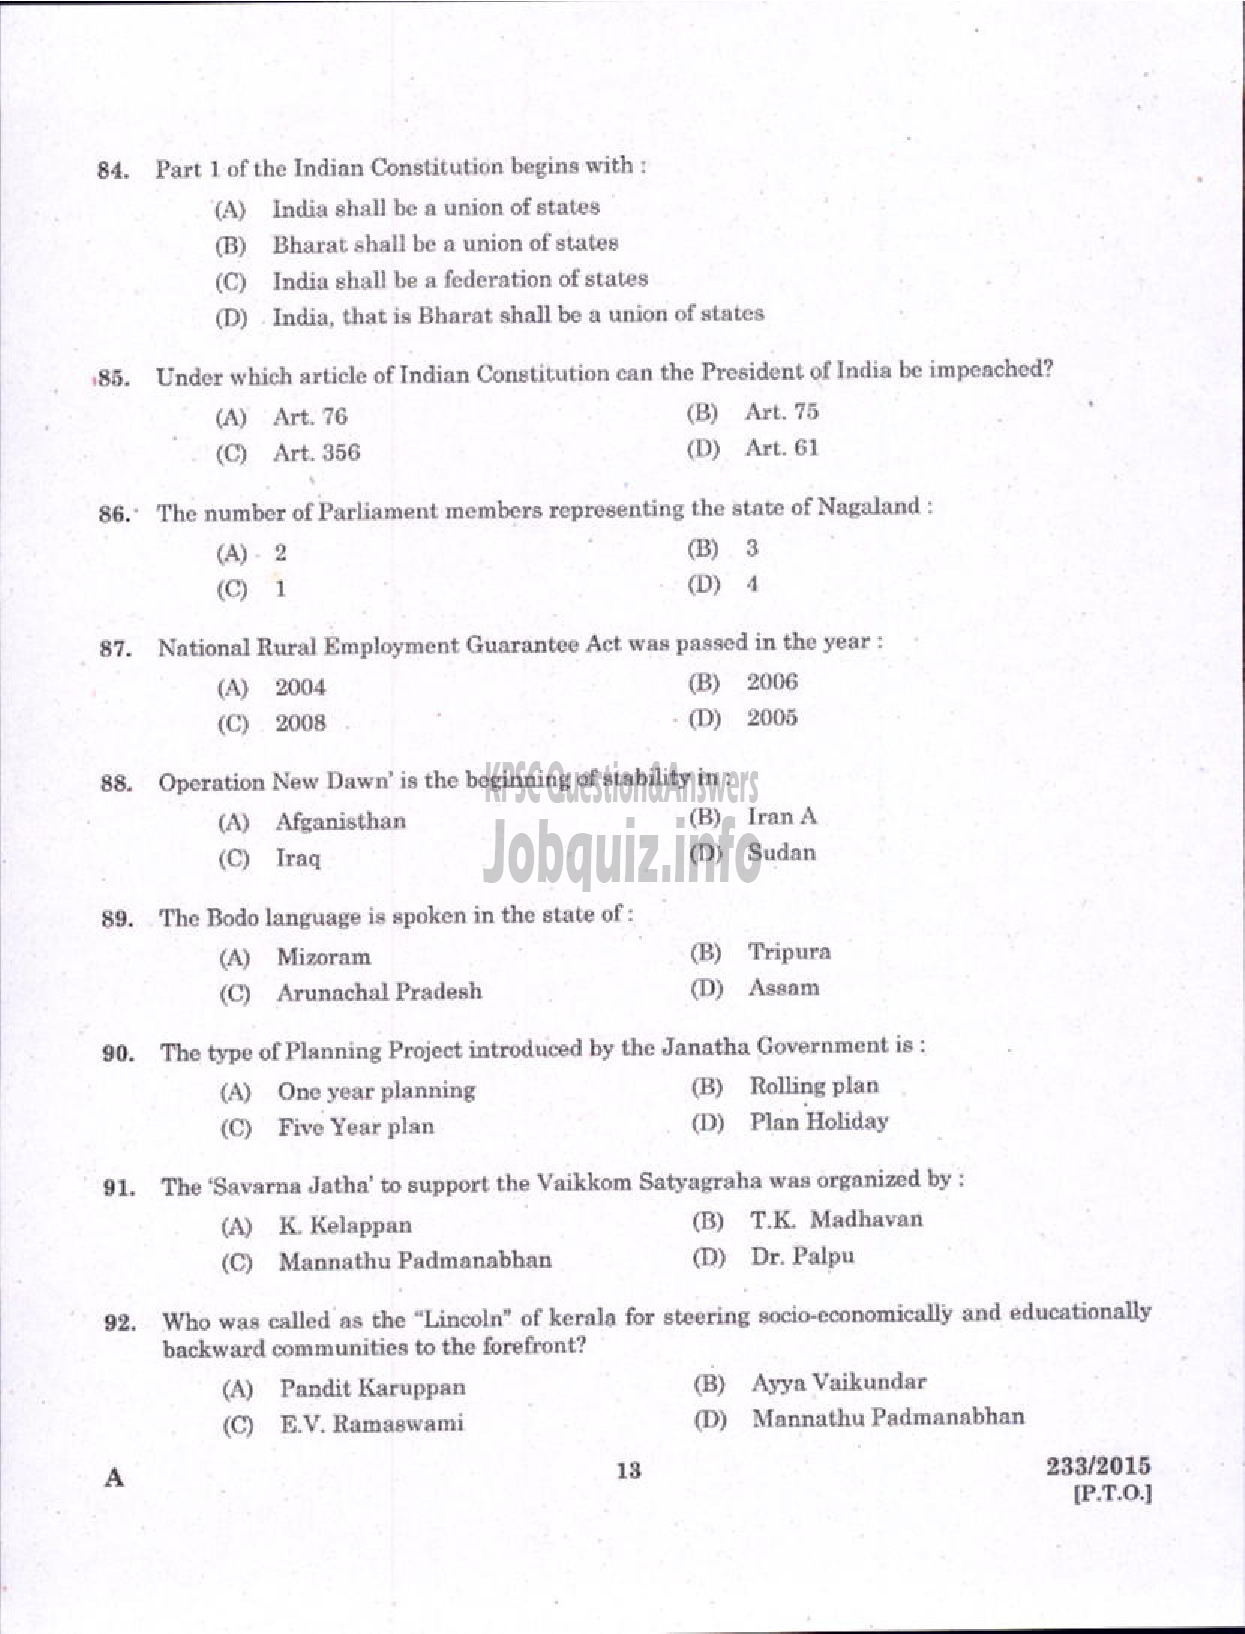 Kerala PSC Question Paper - LECTURER IN COMMERCE TECHNICAL EDUCATION-11